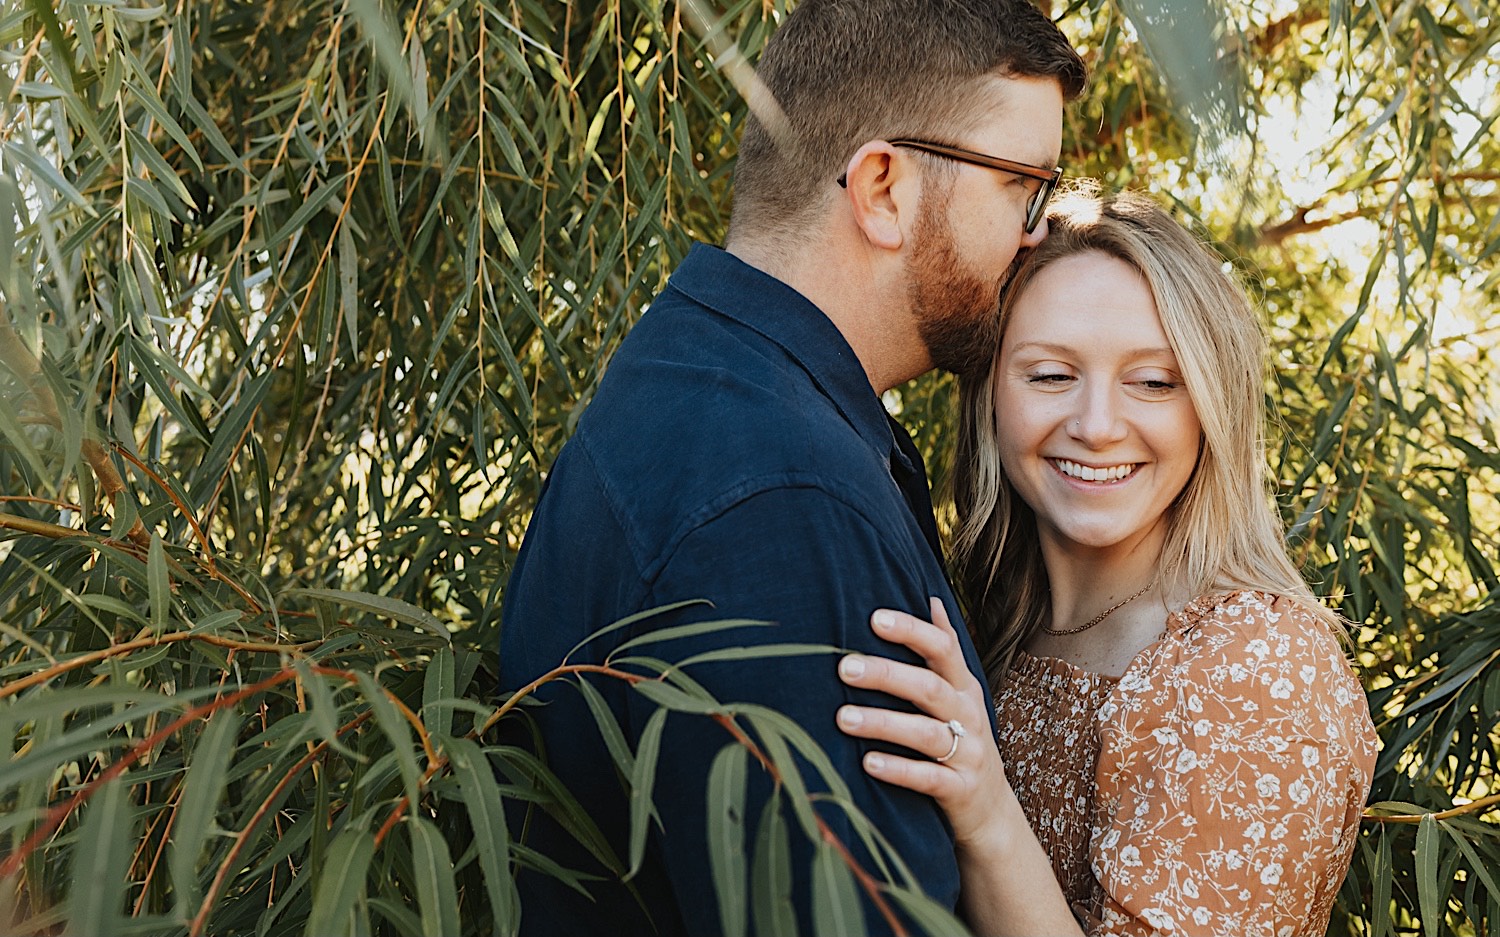 During a fall engagement session in Winona a couple embrace as the man kisses the woman on the temple while she smiles and looks to the right as the two are surrounded by the leaves of a tree